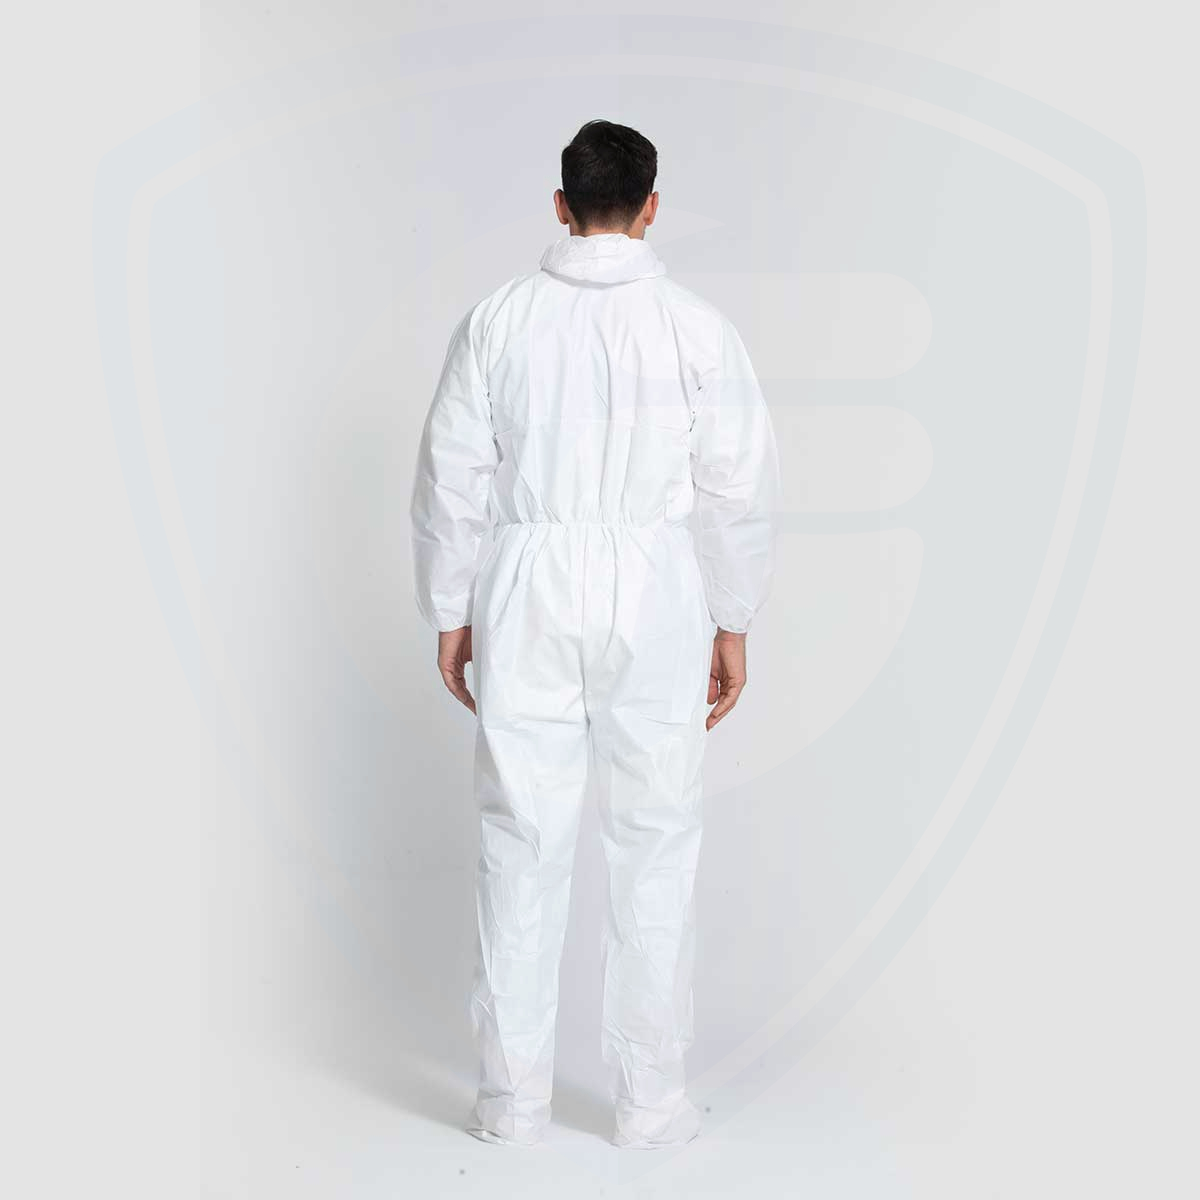 FC2050-2 Type 5/6 Disposable Protective Coverall Orange Zip with White Boots 